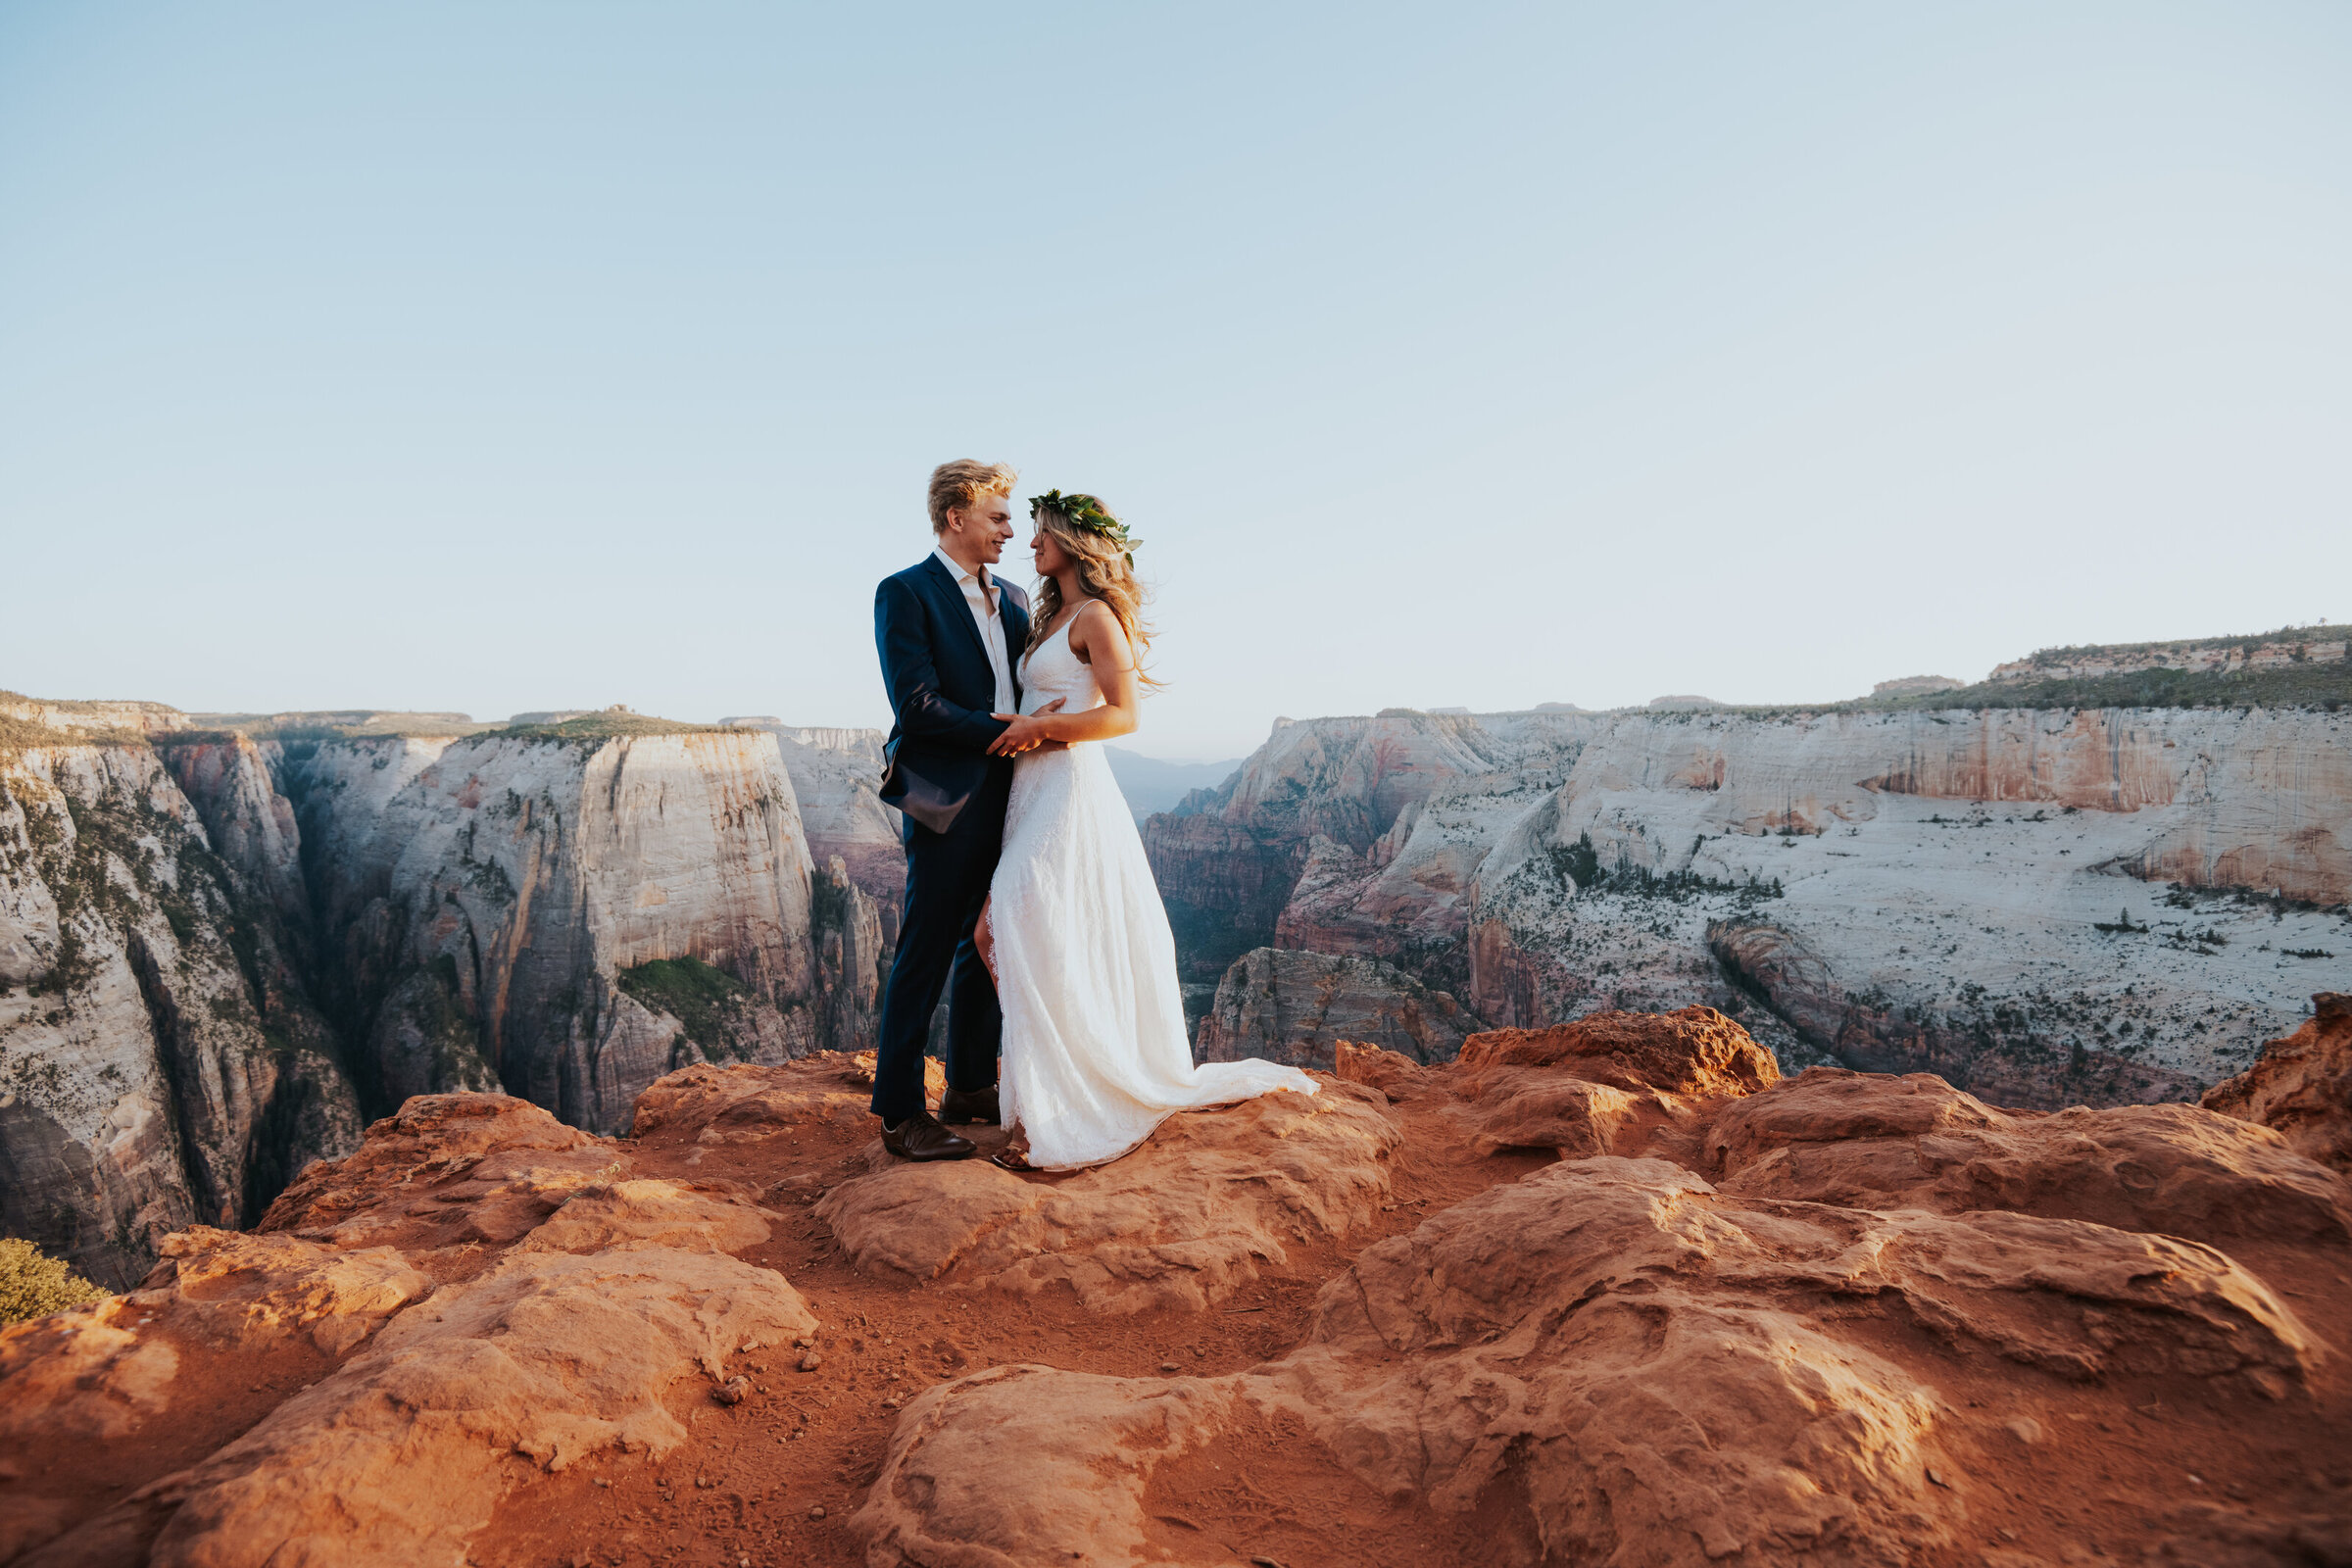 Elopement photography in Southern Utah at Zion National Park.